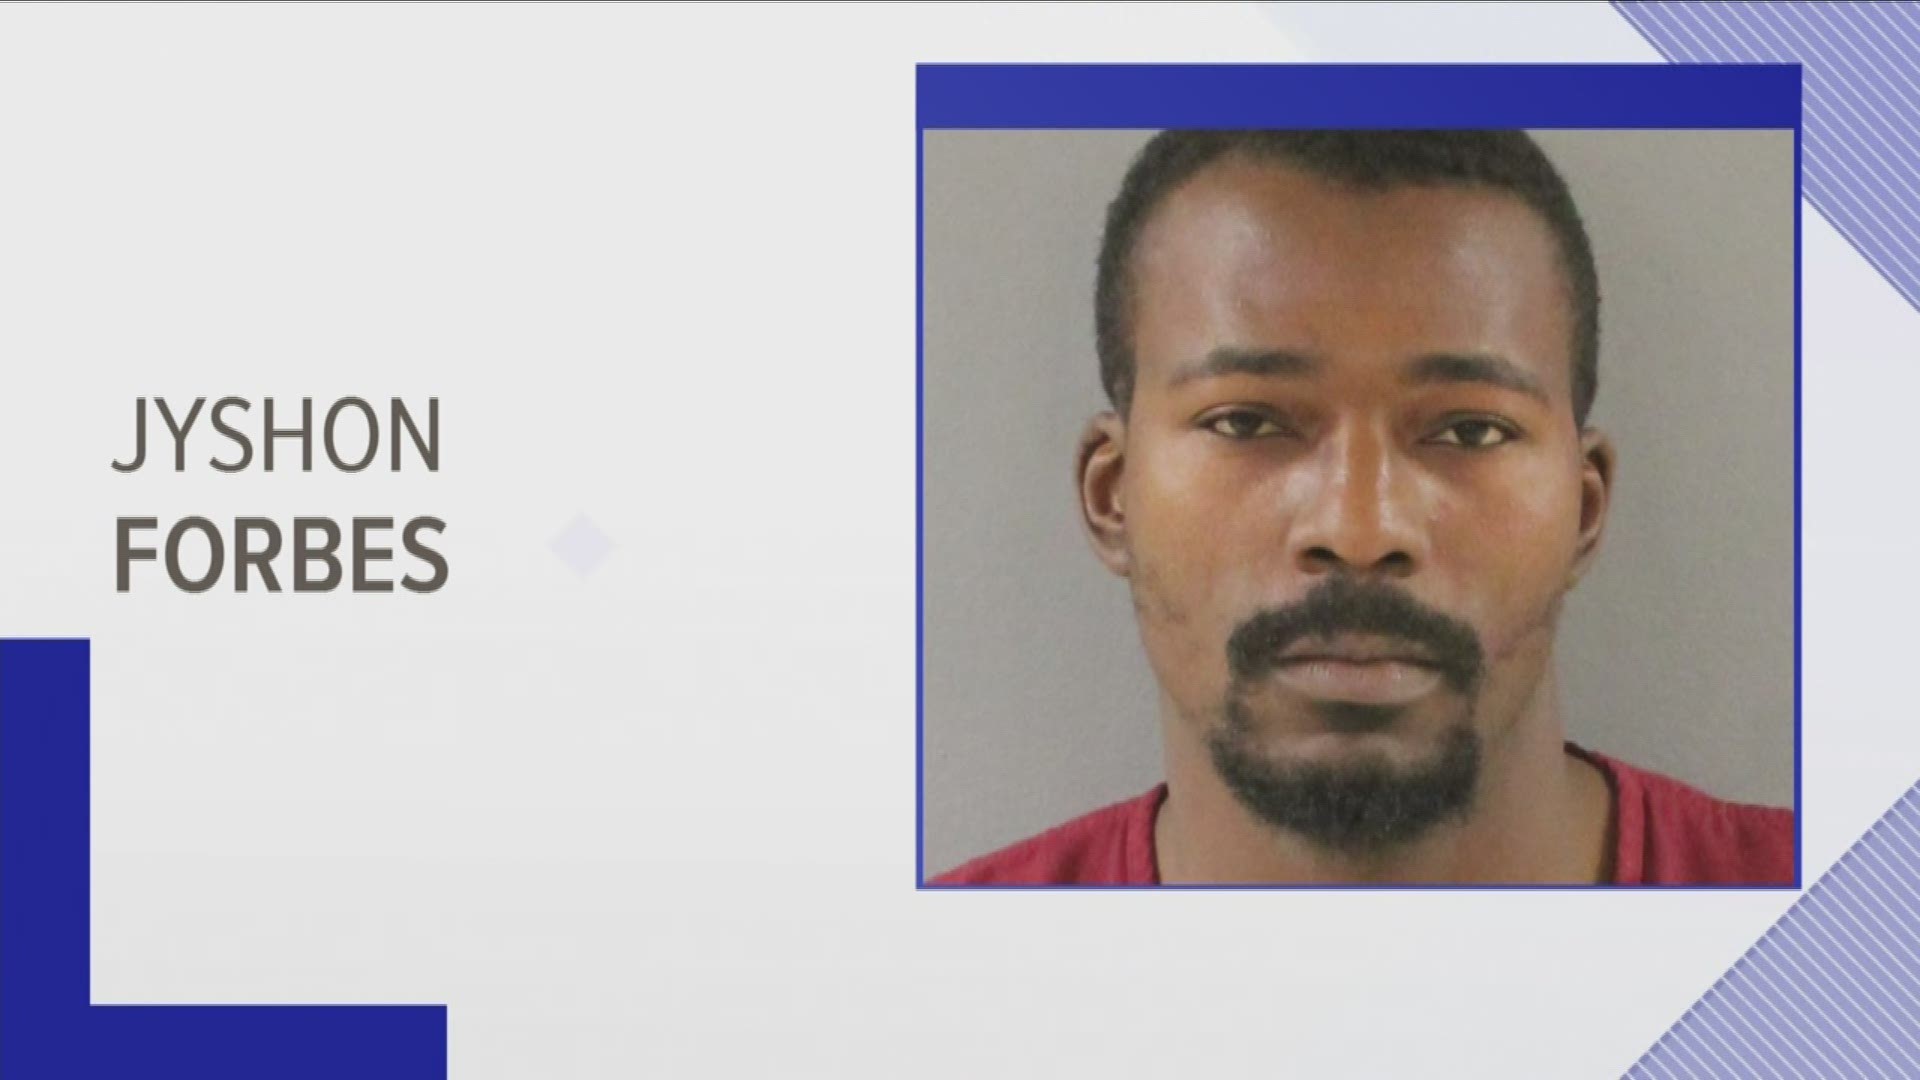 US Marshals arrested a man on the UT campus in connection to a Nashville homicide.